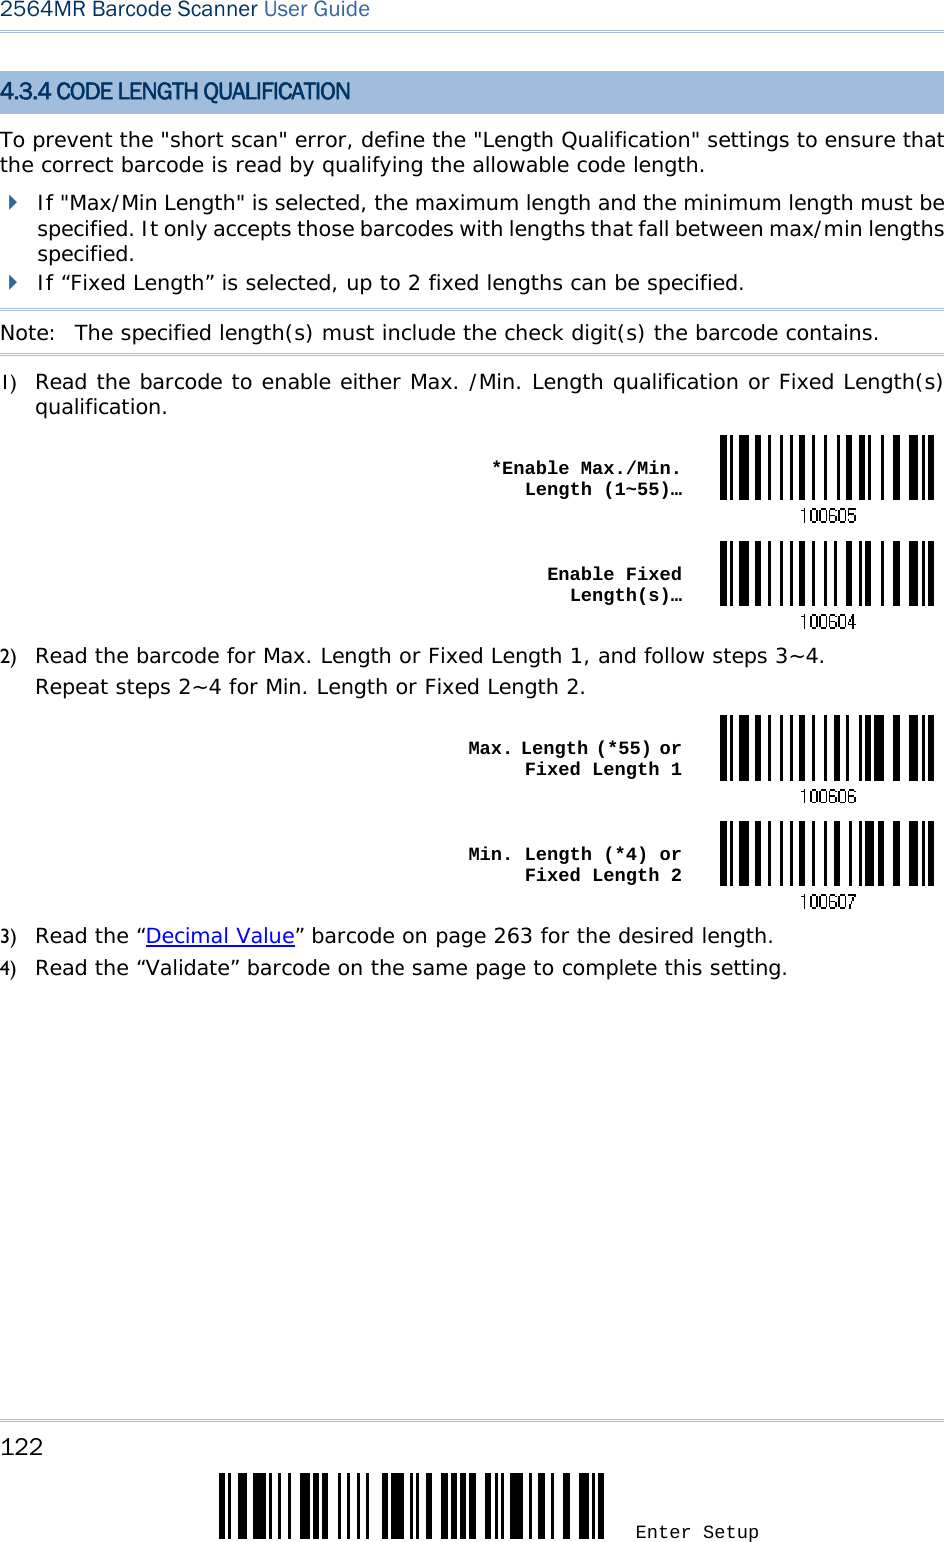 122 Enter Setup 2564MR Barcode Scanner User Guide  4.3.4 CODE LENGTH QUALIFICATION To prevent the &quot;short scan&quot; error, define the &quot;Length Qualification&quot; settings to ensure that the correct barcode is read by qualifying the allowable code length.  If &quot;Max/Min Length&quot; is selected, the maximum length and the minimum length must be specified. It only accepts those barcodes with lengths that fall between max/min lengths specified.  If “Fixed Length” is selected, up to 2 fixed lengths can be specified. Note:   The specified length(s) must include the check digit(s) the barcode contains. 1) Read the barcode to enable either Max. /Min. Length qualification or Fixed Length(s) qualification.  *Enable Max./Min. Length (1~55)… Enable Fixed Length(s)…2) Read the barcode for Max. Length or Fixed Length 1, and follow steps 3~4. Repeat steps 2~4 for Min. Length or Fixed Length 2.  Max. Length (*55) or Fixed Length 1 Min. Length (*4) or Fixed Length 23) Read the “Decimal Value” barcode on page 263 for the desired length.  4) Read the “Validate” barcode on the same page to complete this setting.      